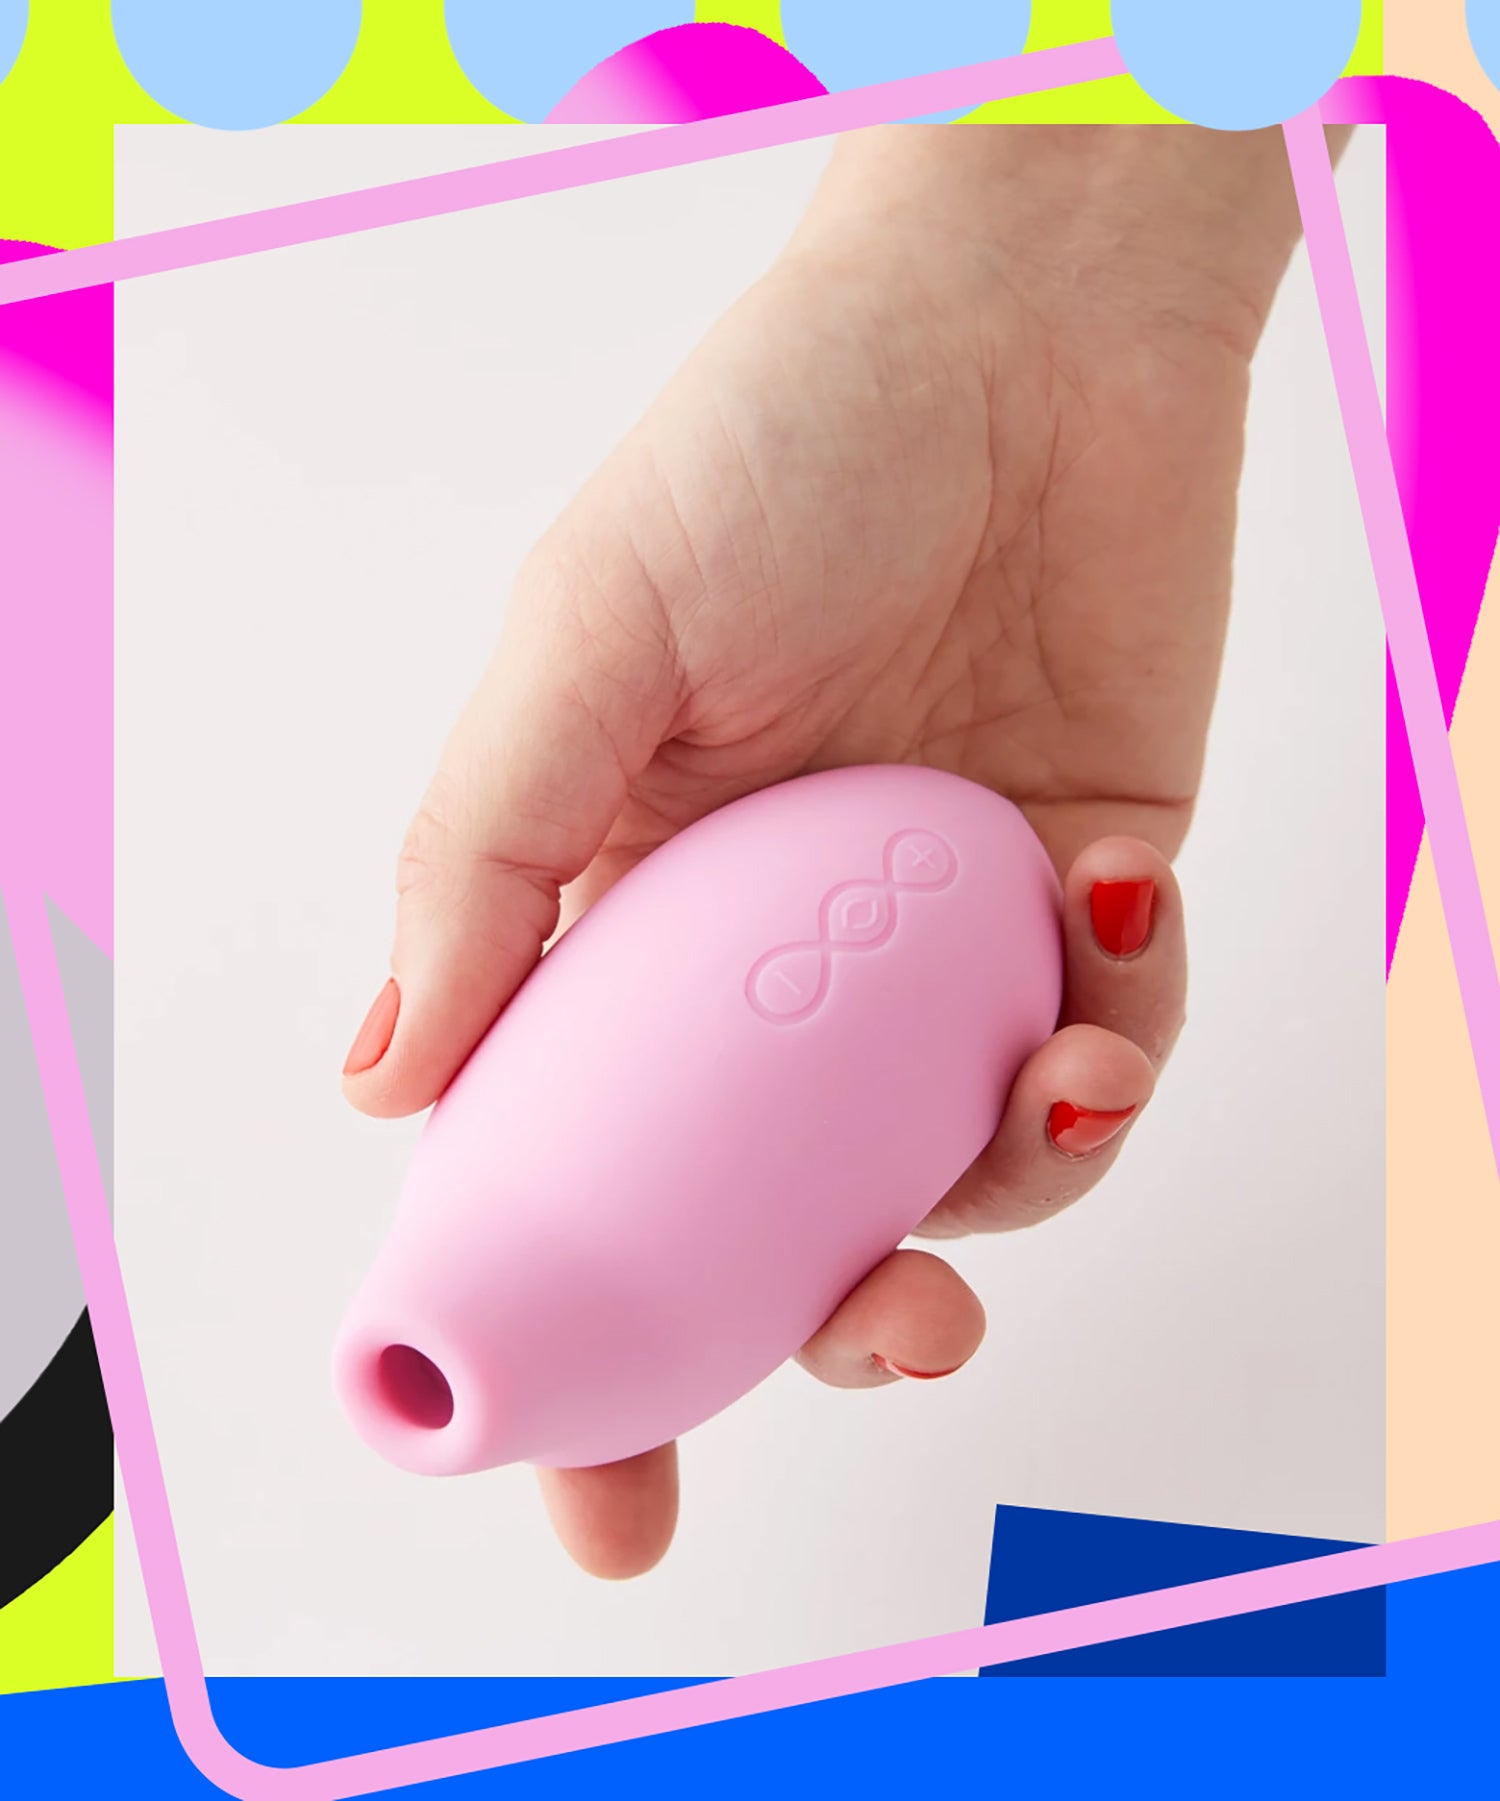 The 7 Best Urban Outfitters Sex Toys and Sexual Wellness photo